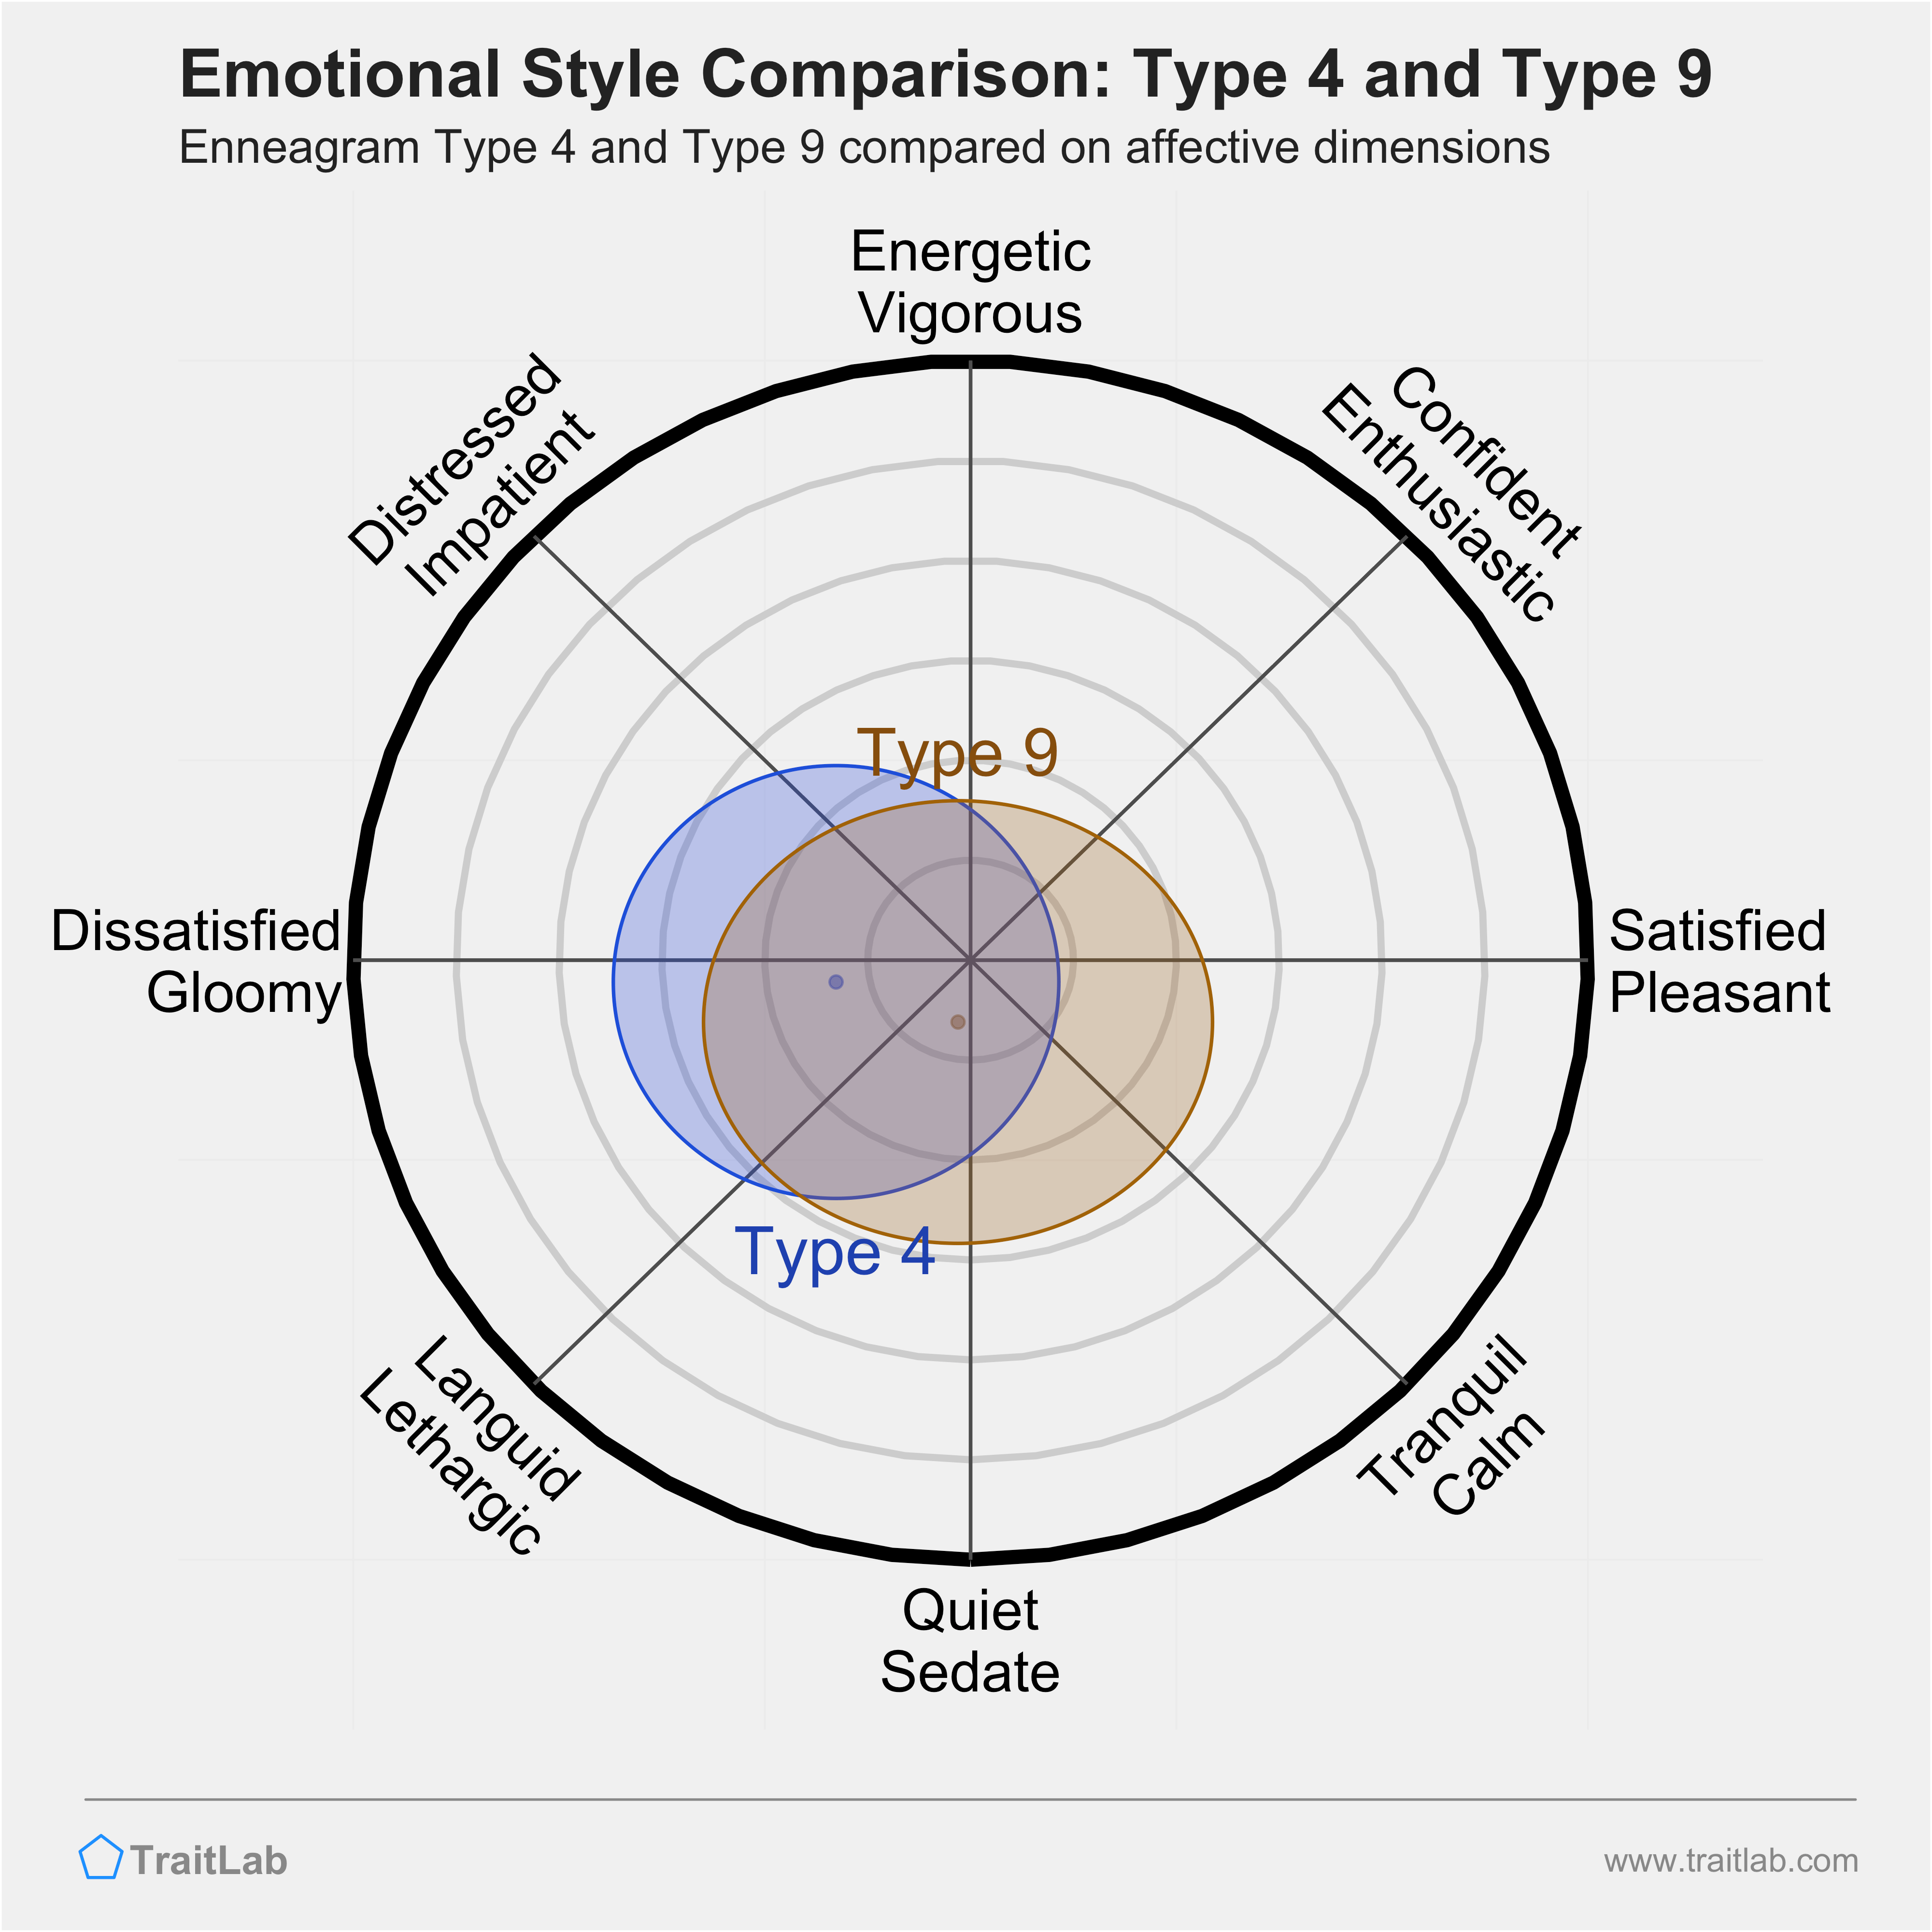 Type 4 and Type 9 comparison across emotional (affective) dimensions